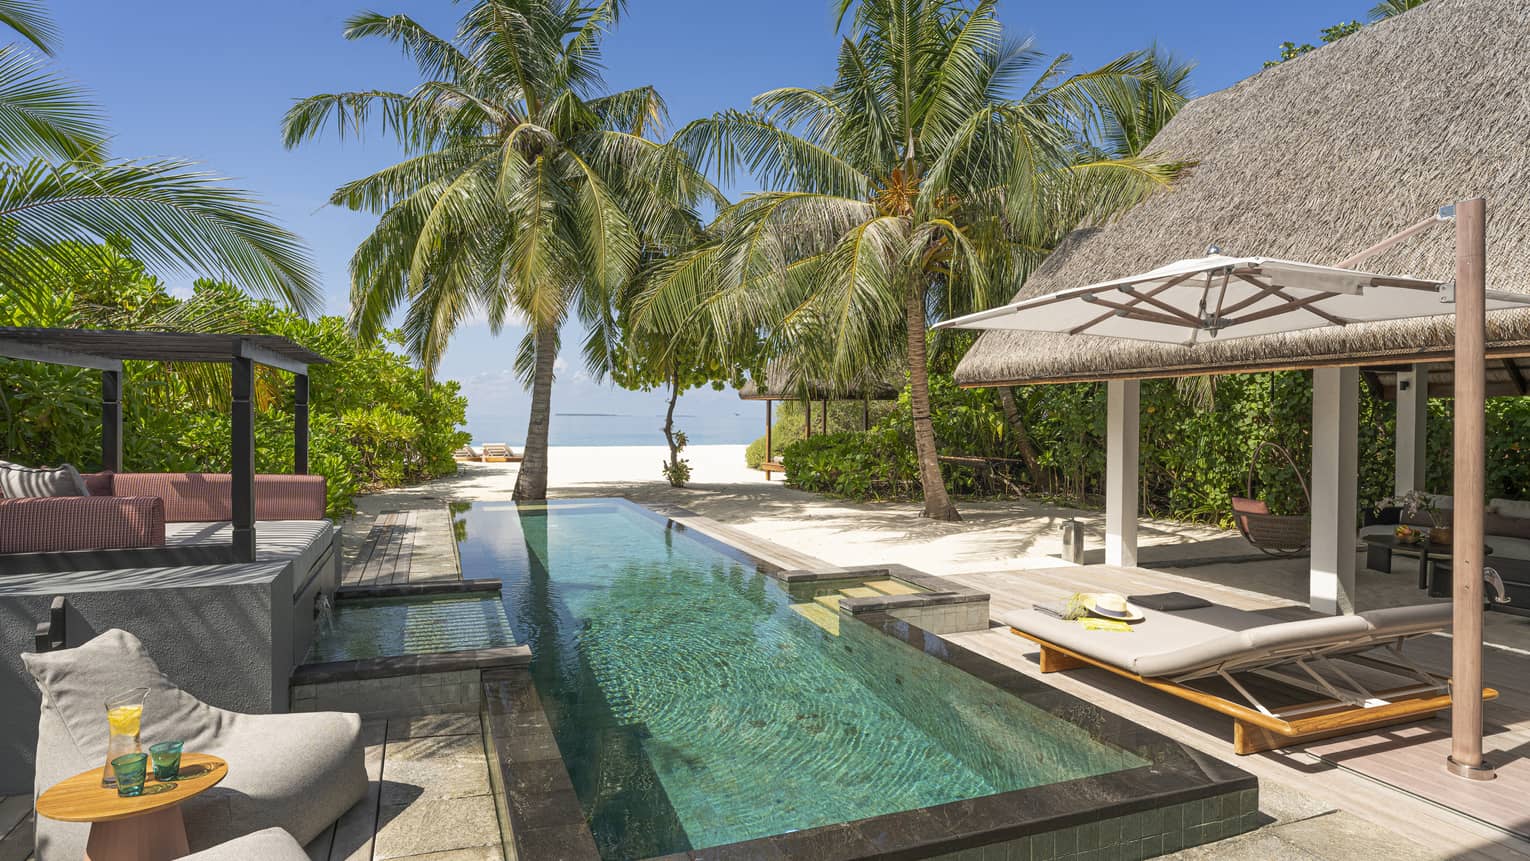 Private pool and lounge deck, with easy access to the beach